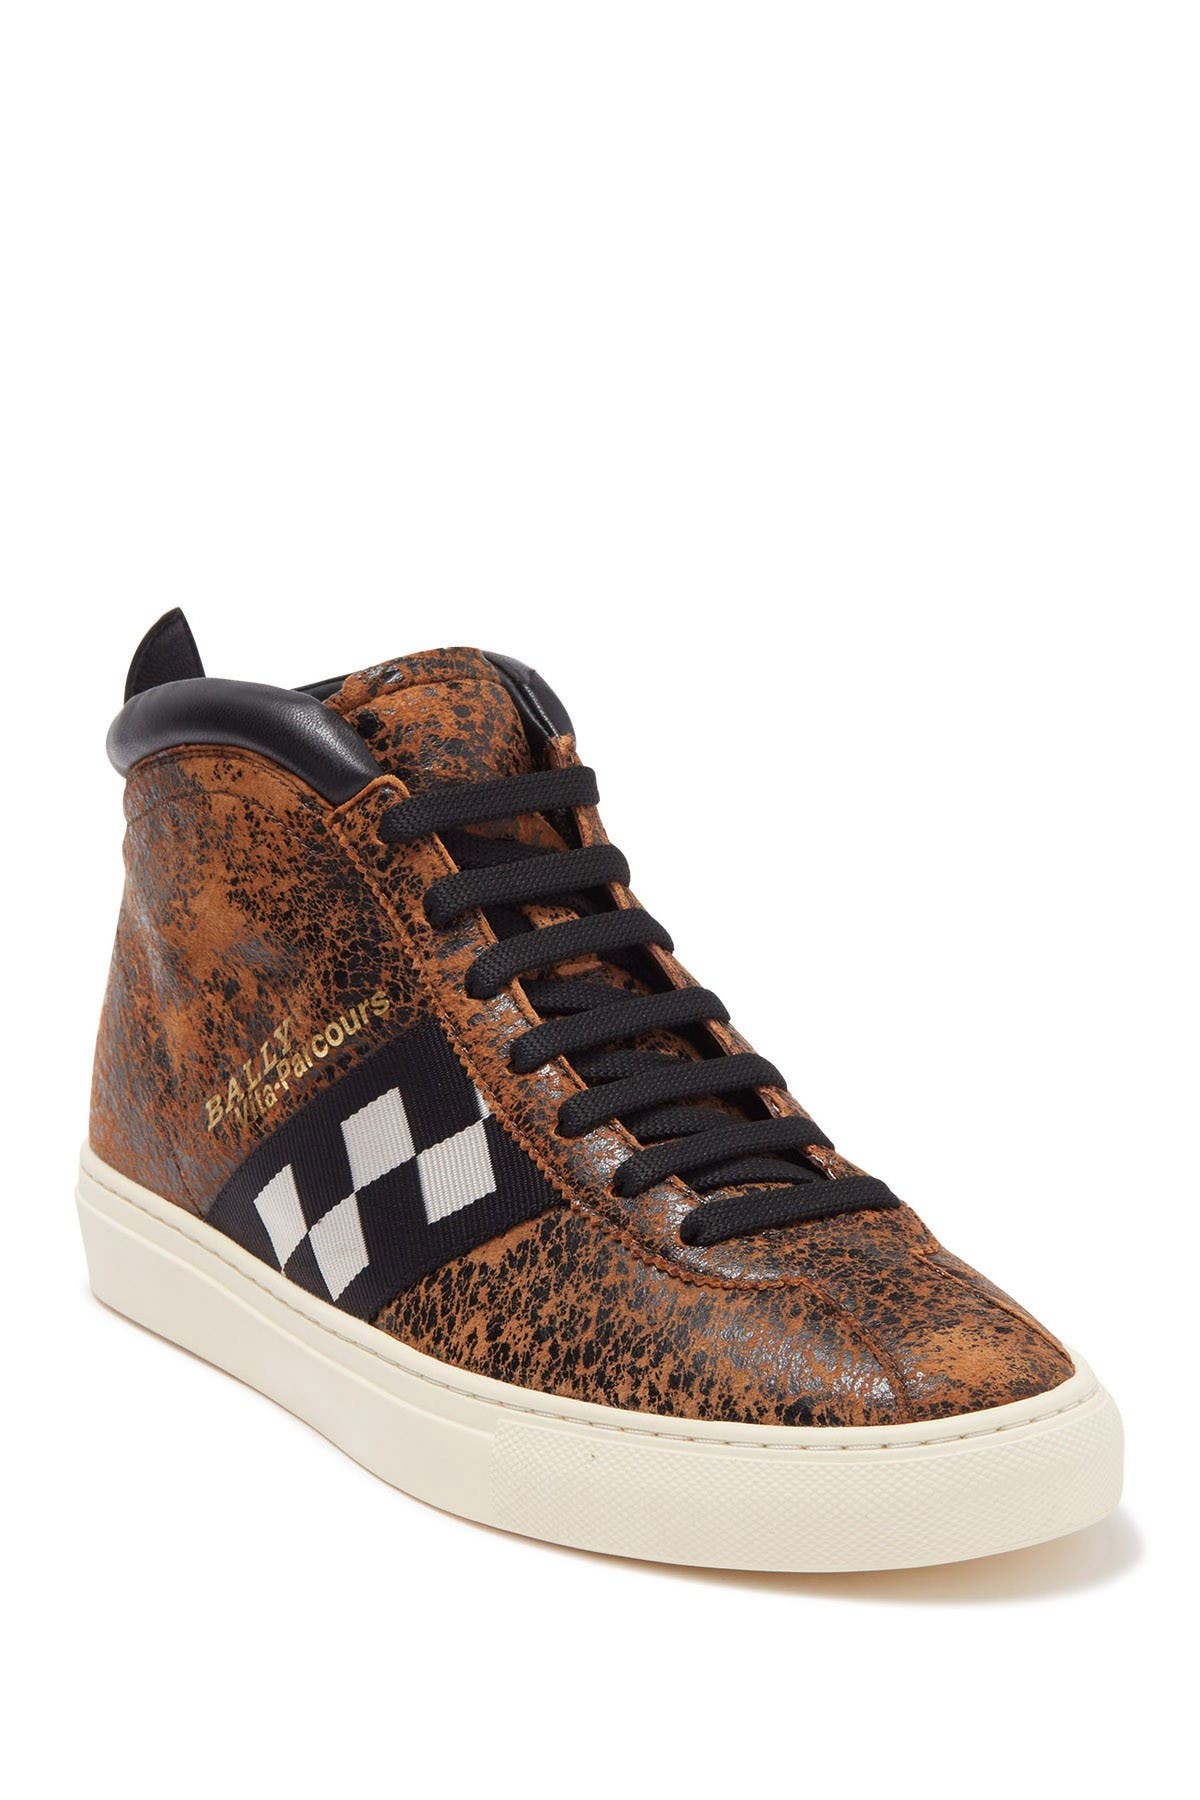 Vita Parcours Leather High Top Sneaker 